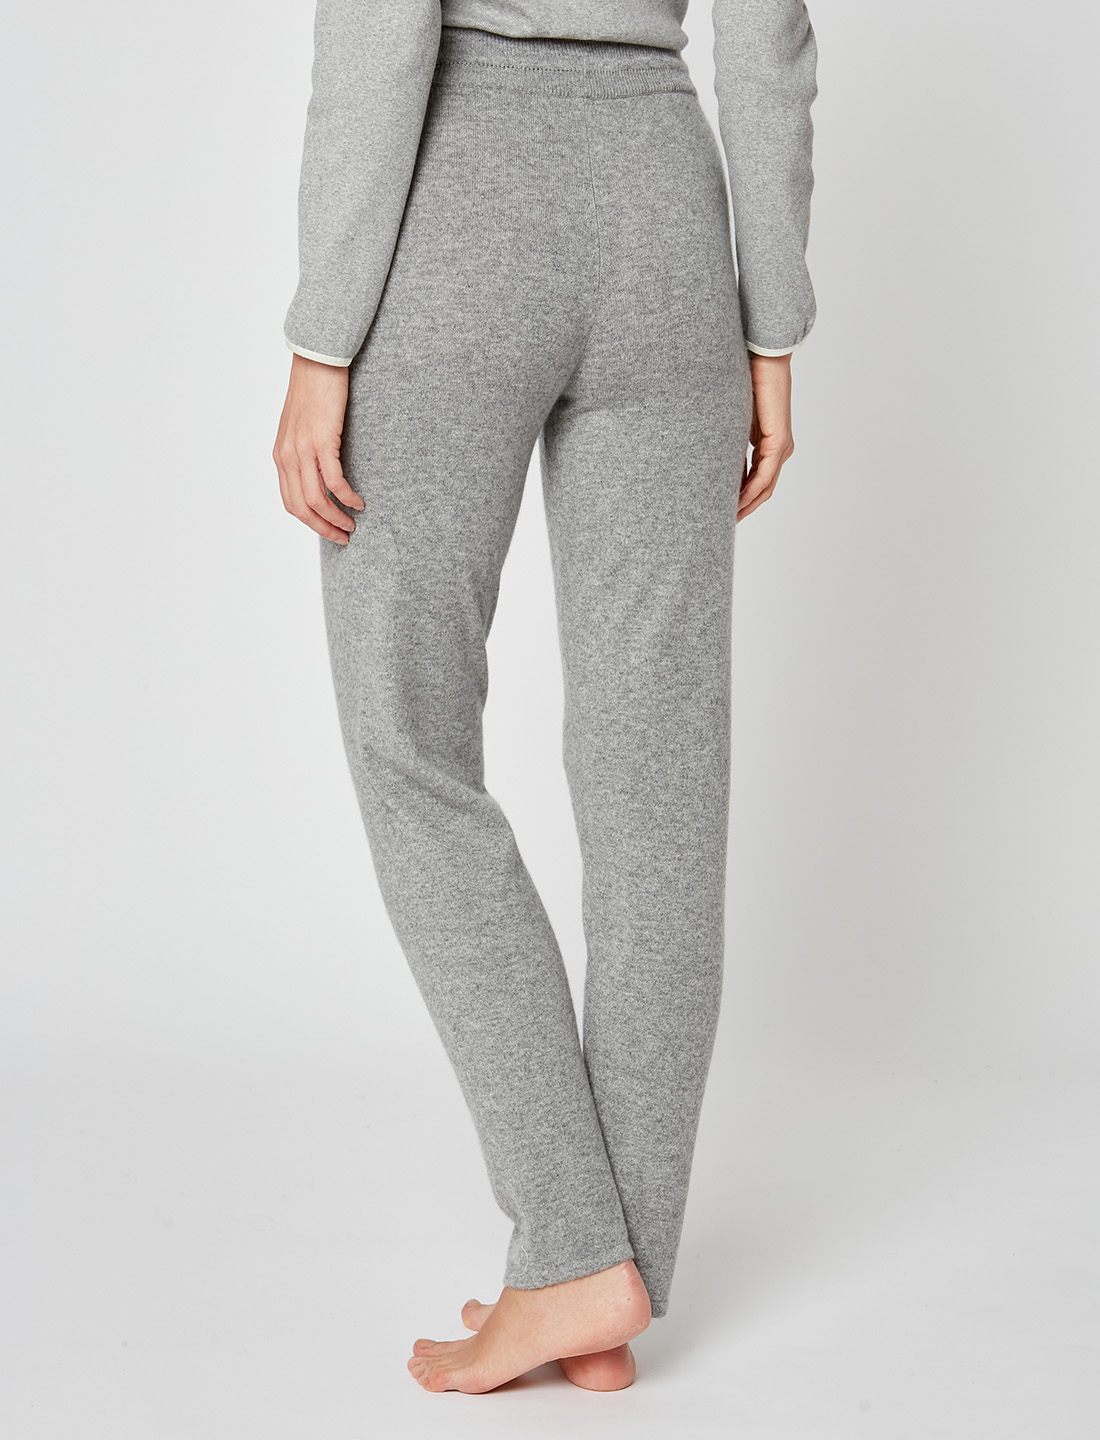 Cashmere straight-leg trousers in grey fleck